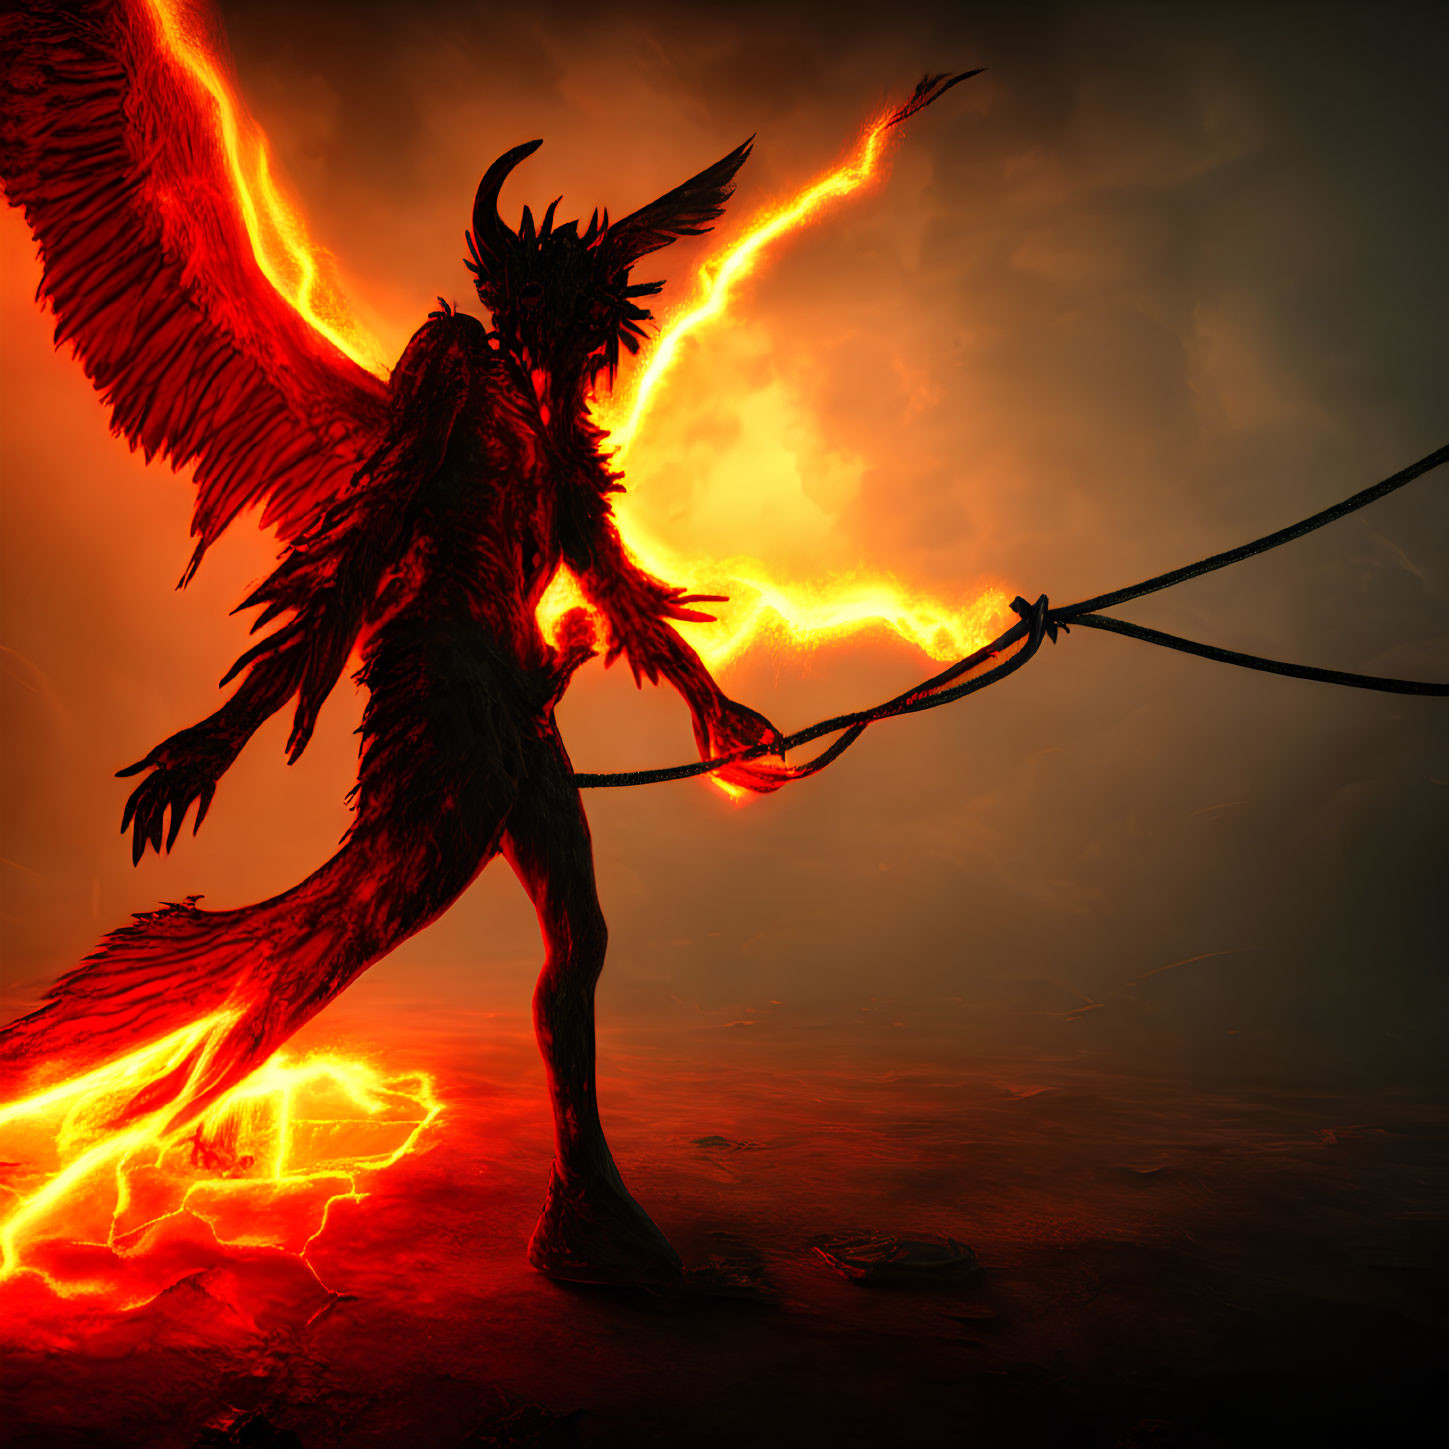 Fiery winged creature with burning spear in volcanic landscape